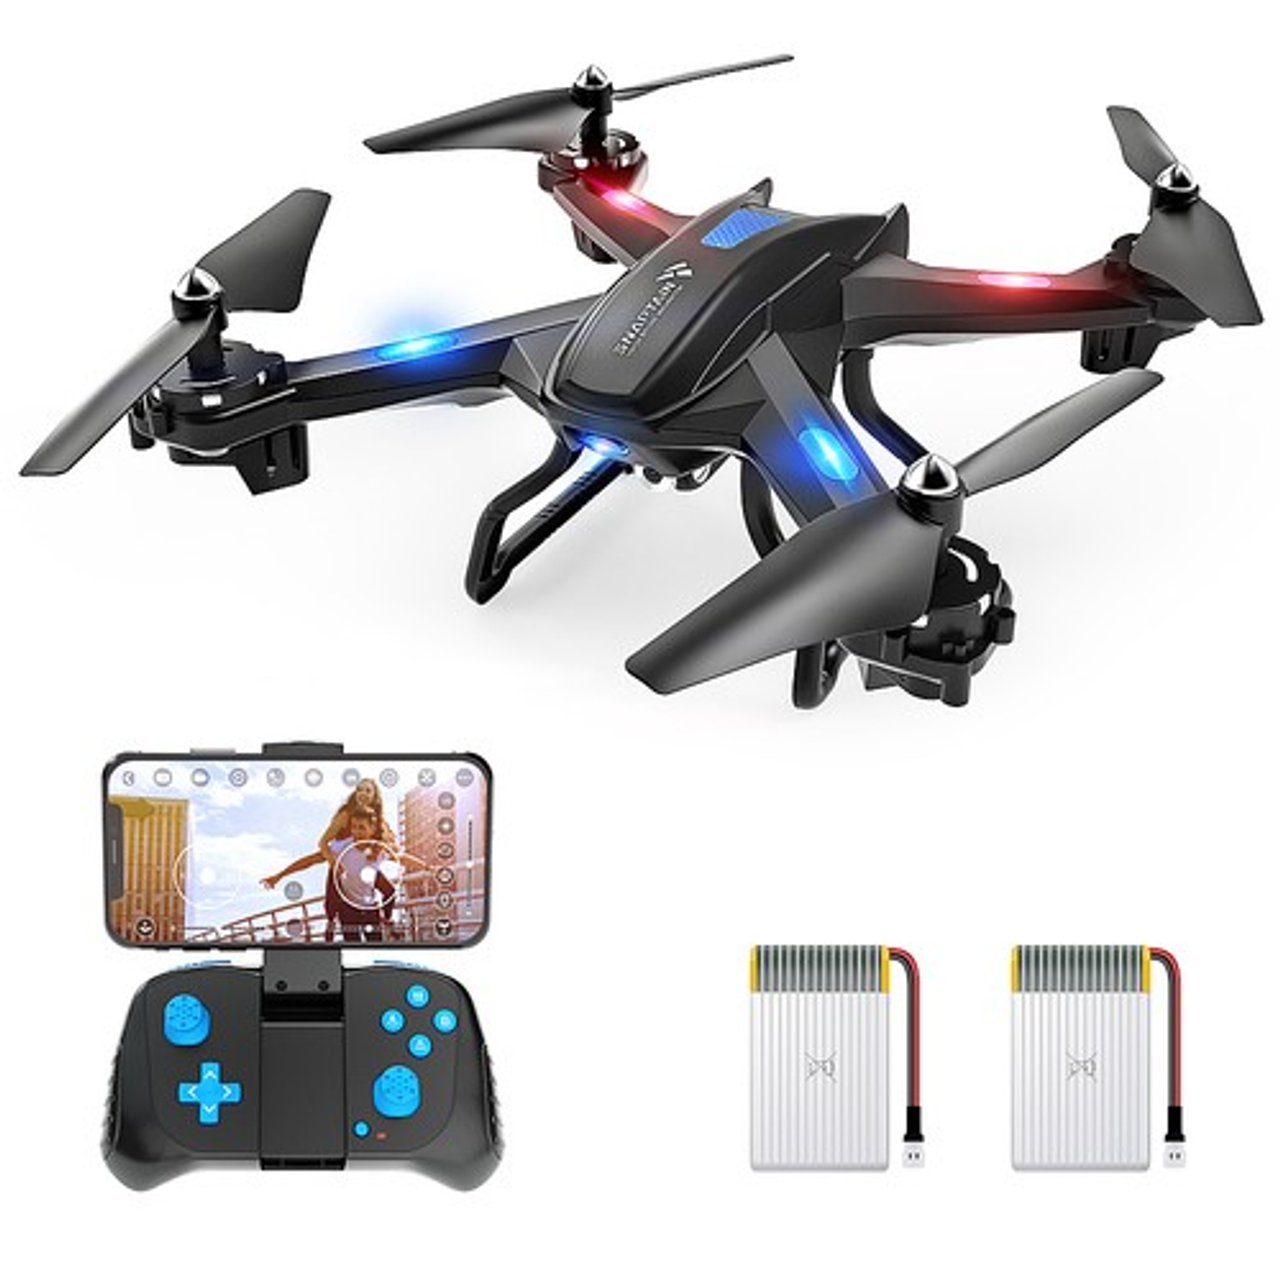 Vantop - Snaptain S5C FHD Drone with Remote Controller - Black